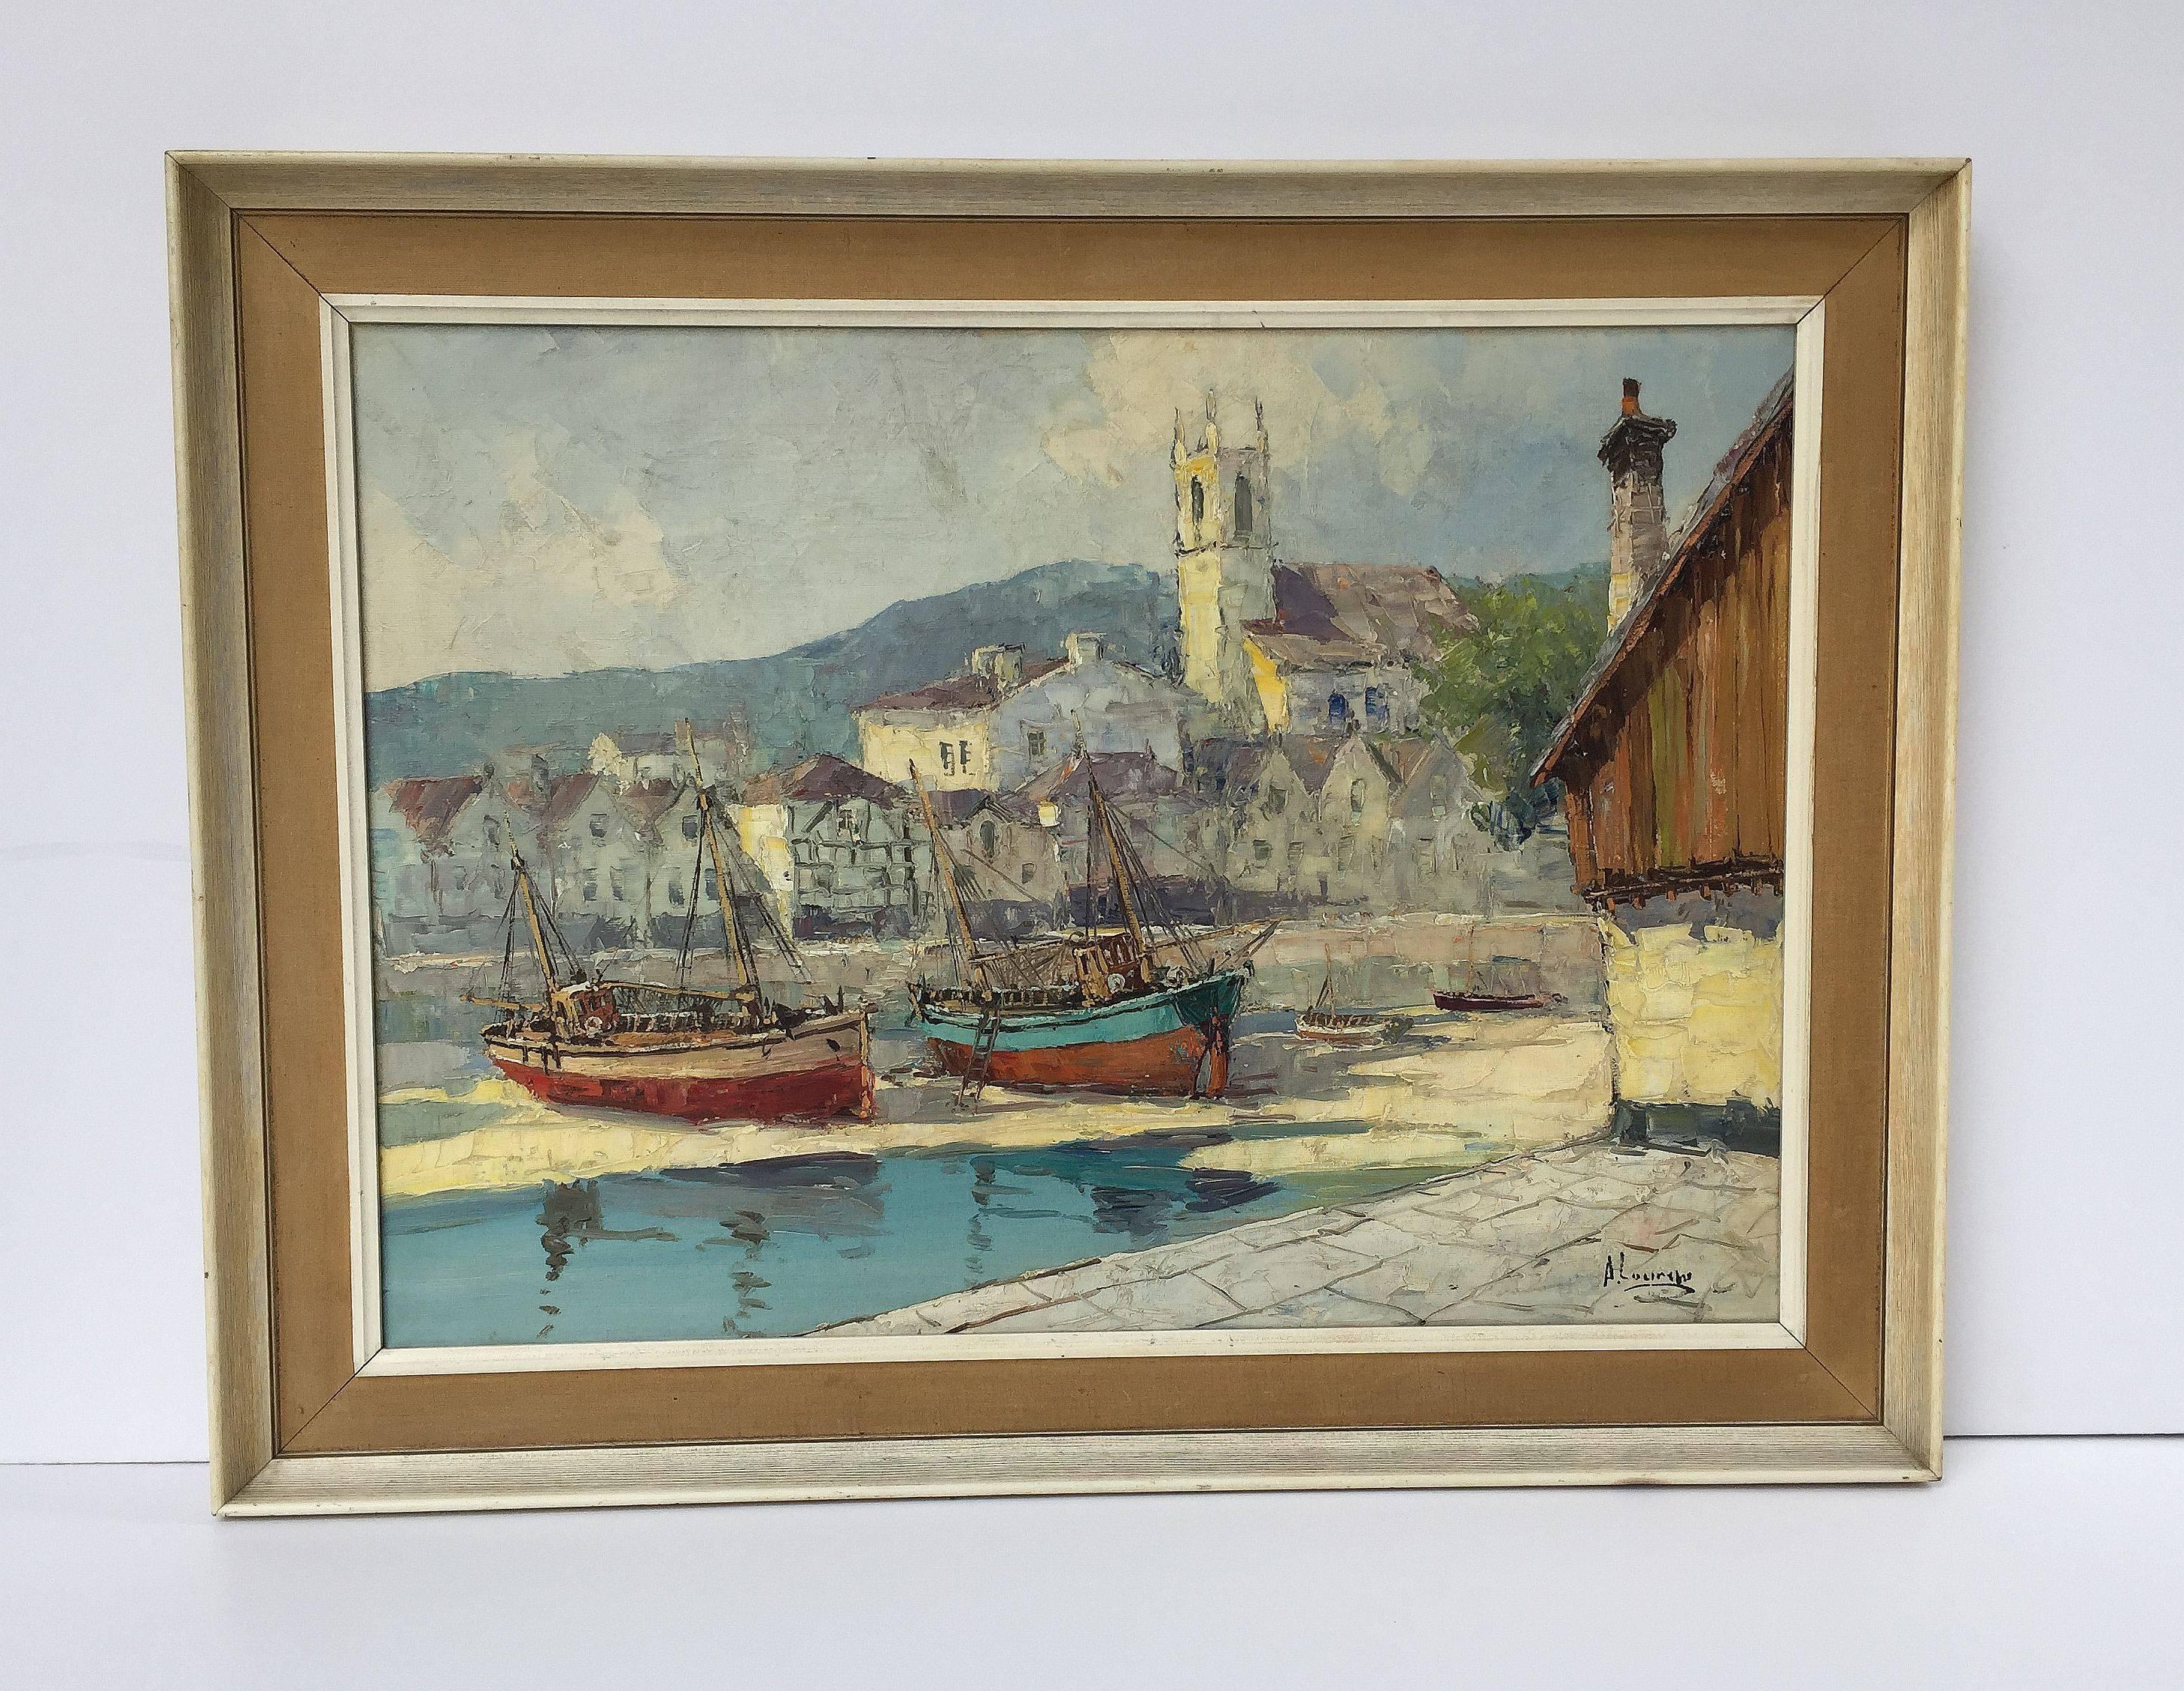 A fine French oil painting on canvas of a harbor scene, featuring a view of two boats in the foreground and a picturesque town in the background.